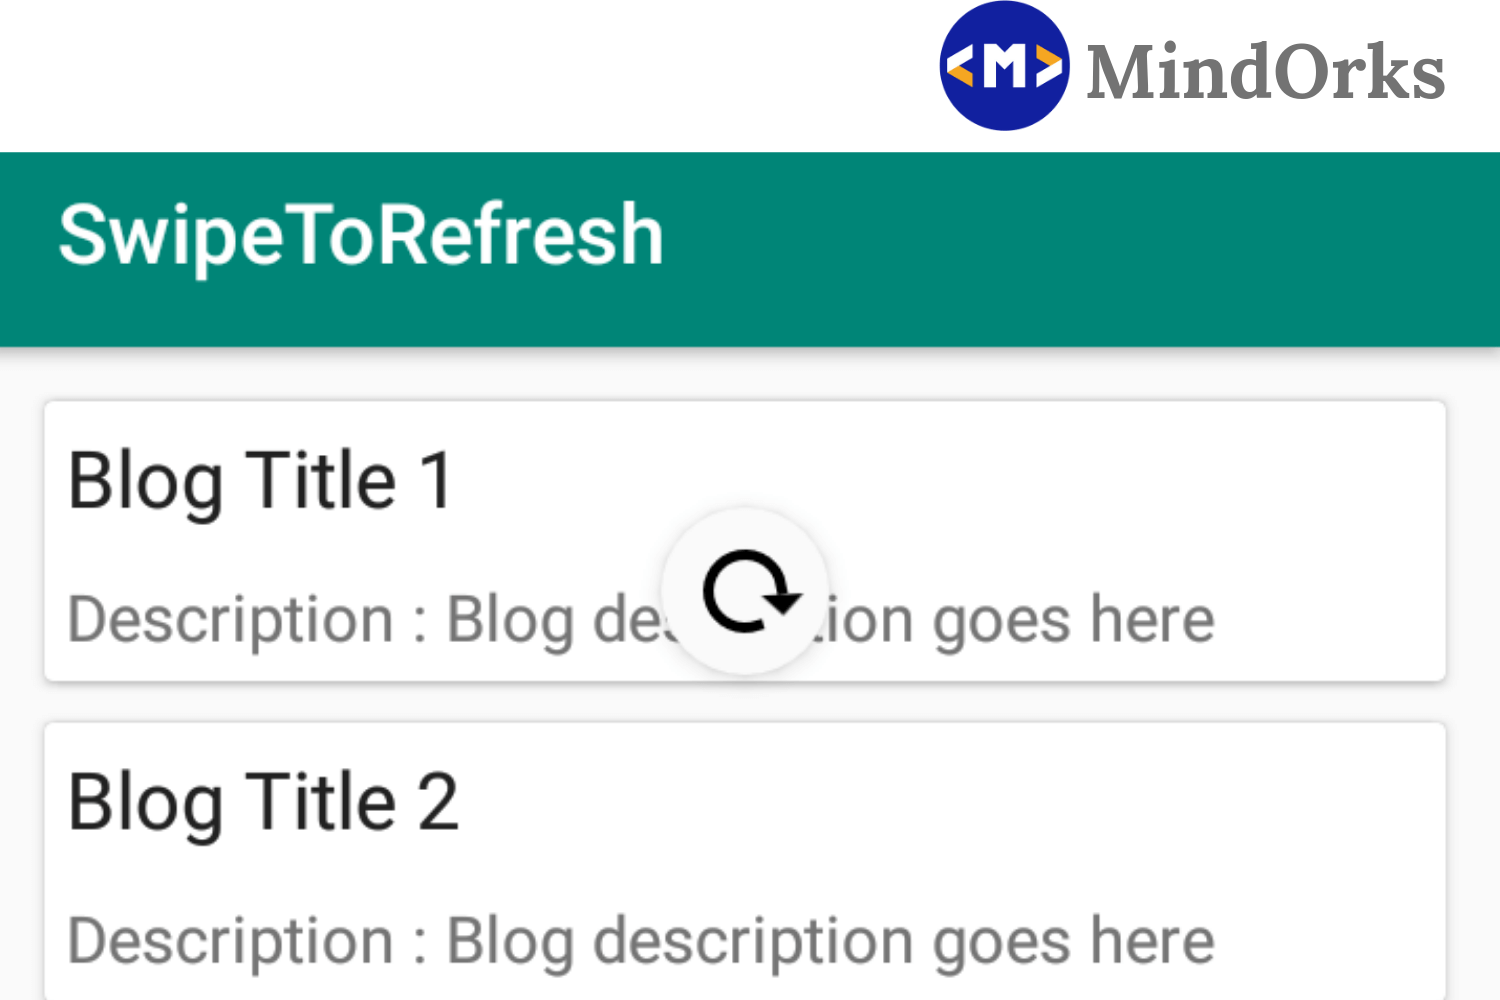 Using Swipe-to-refresh in Android Application